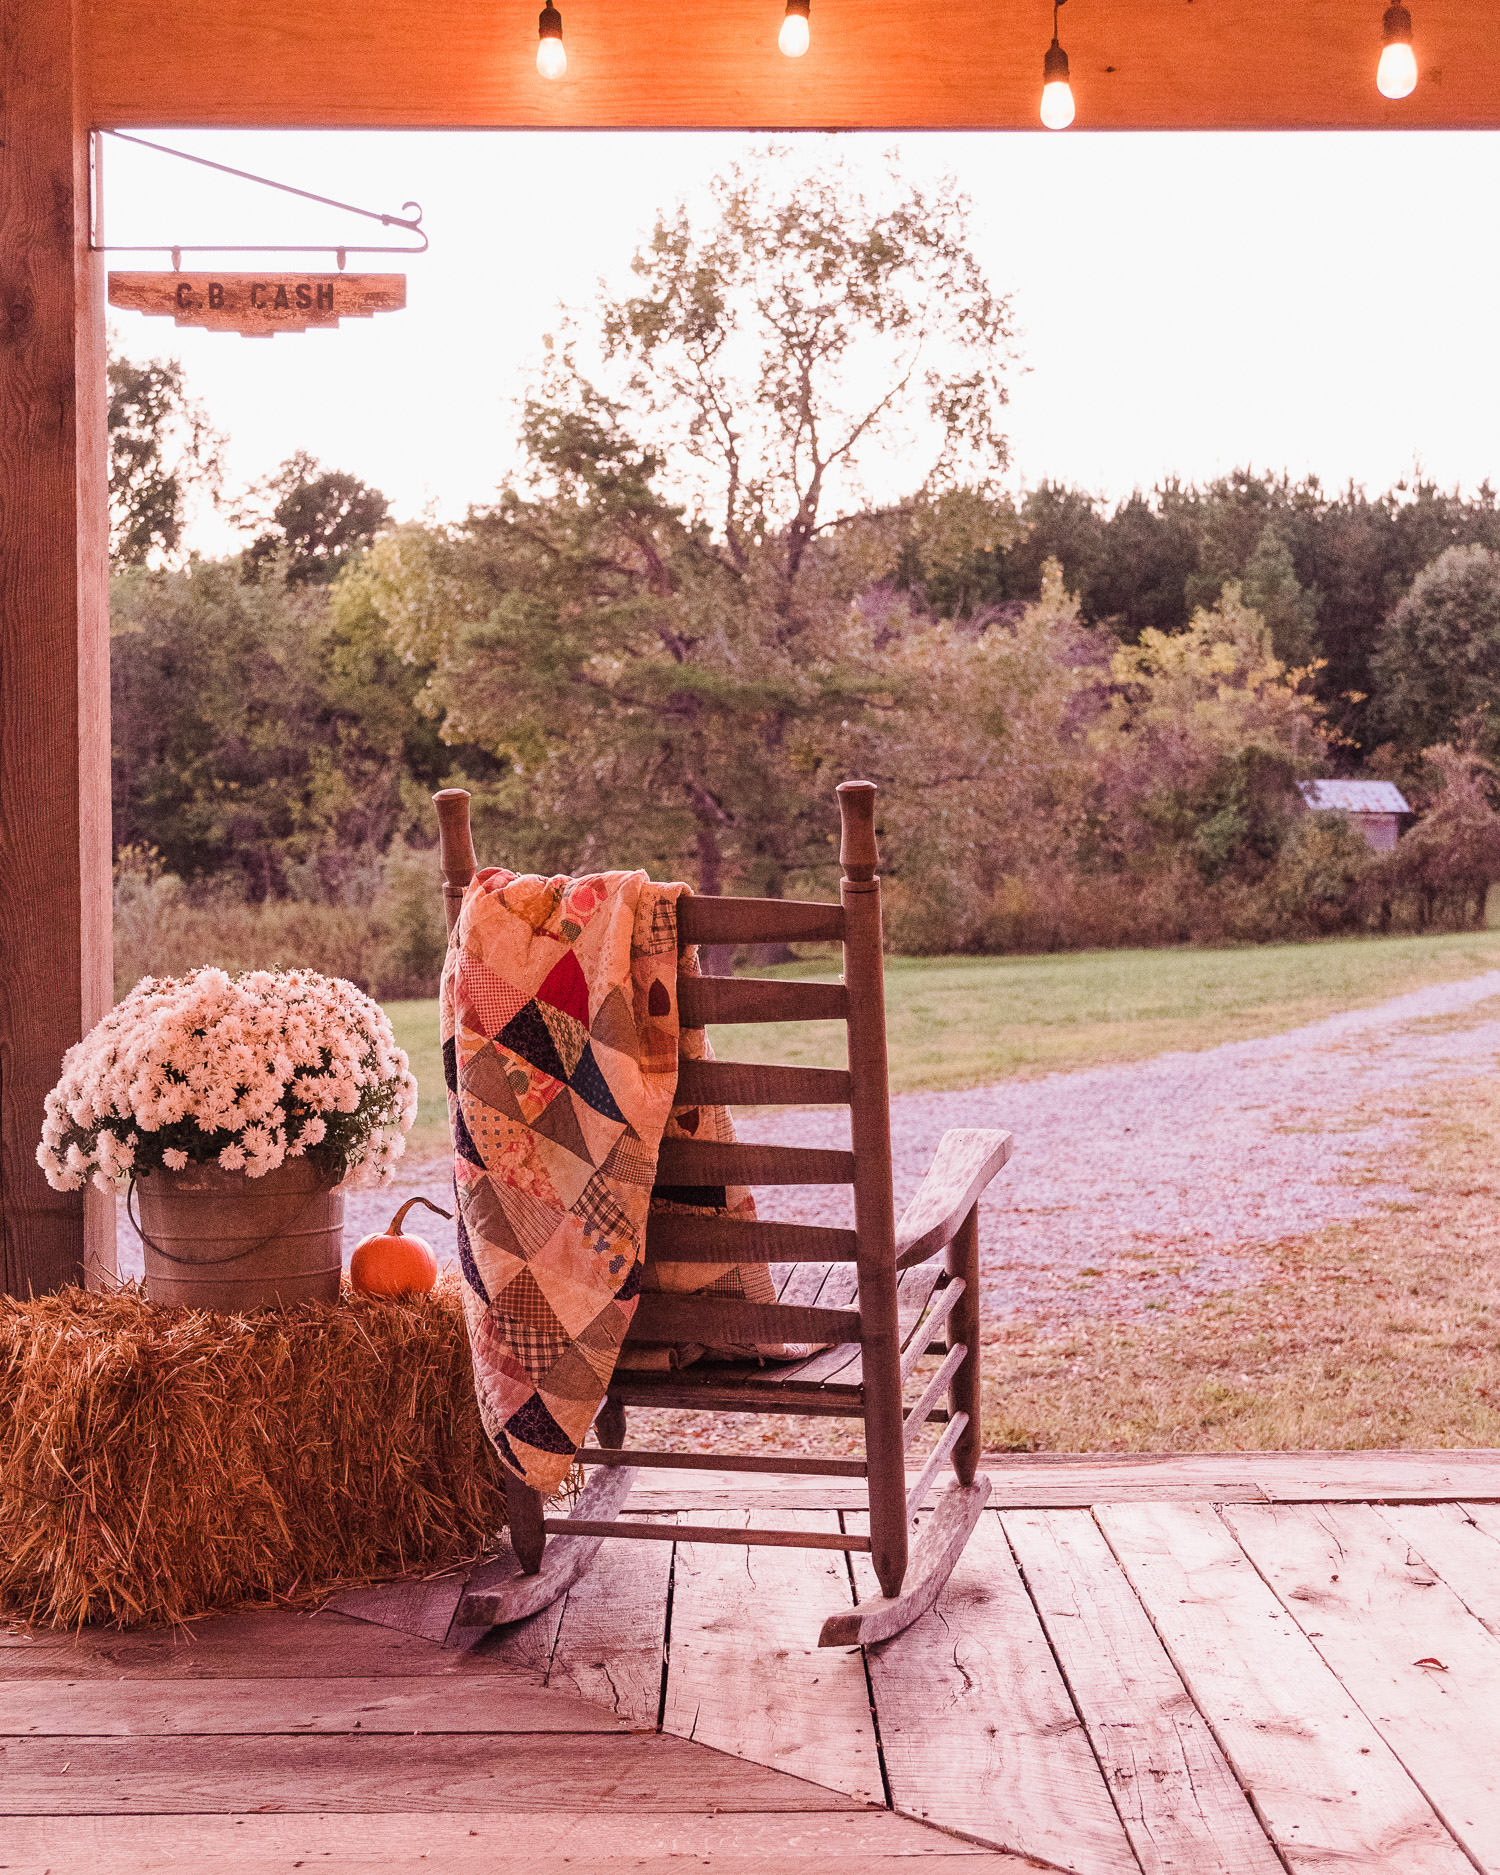 Decorating the barn porch for fall.